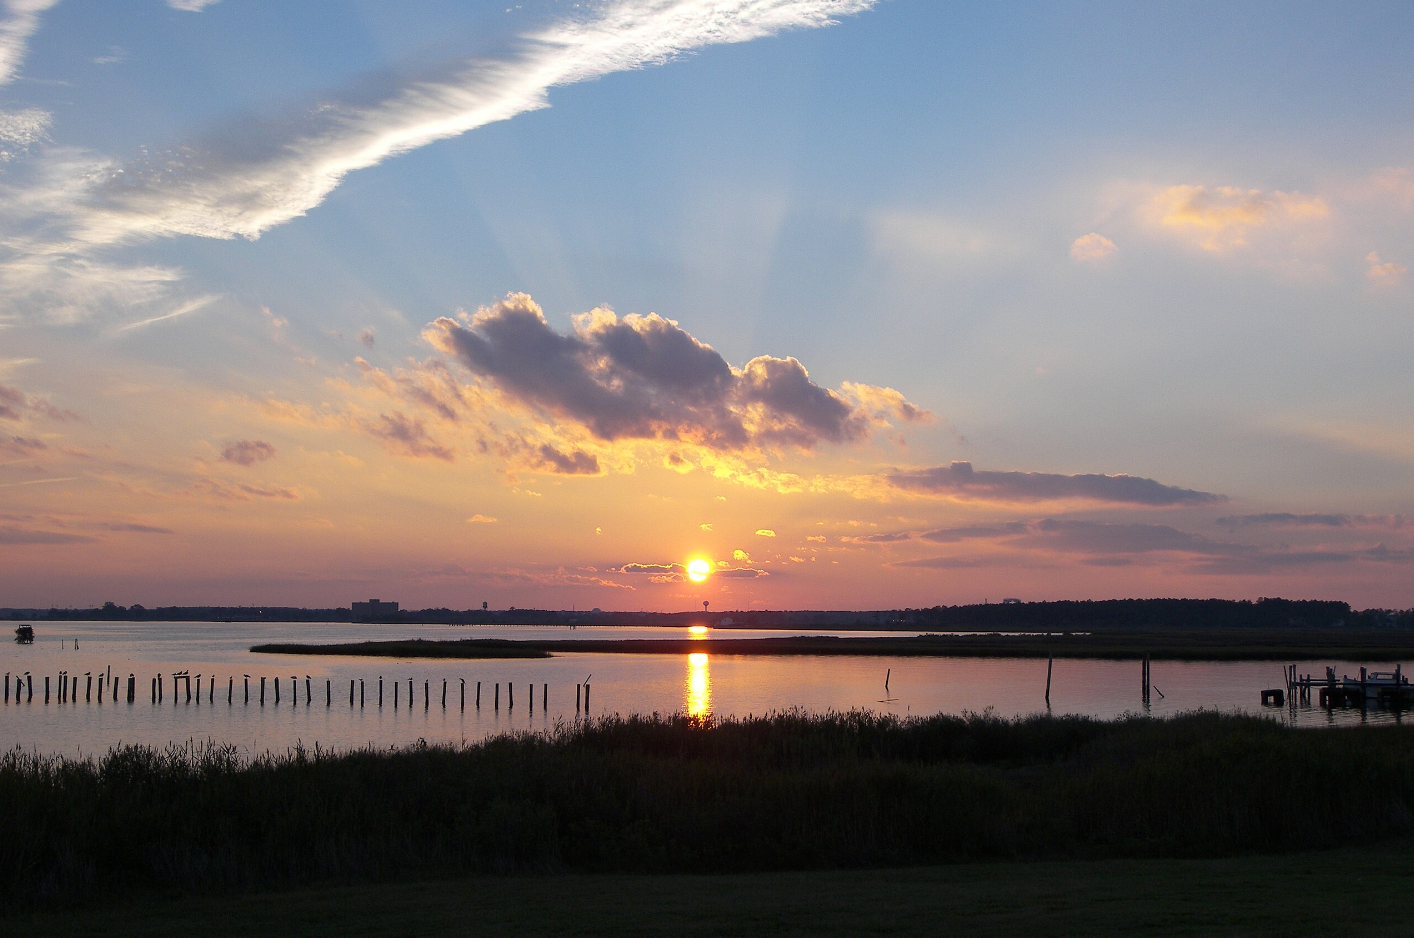 Sunset in the marshes near Poquoson, Virginia